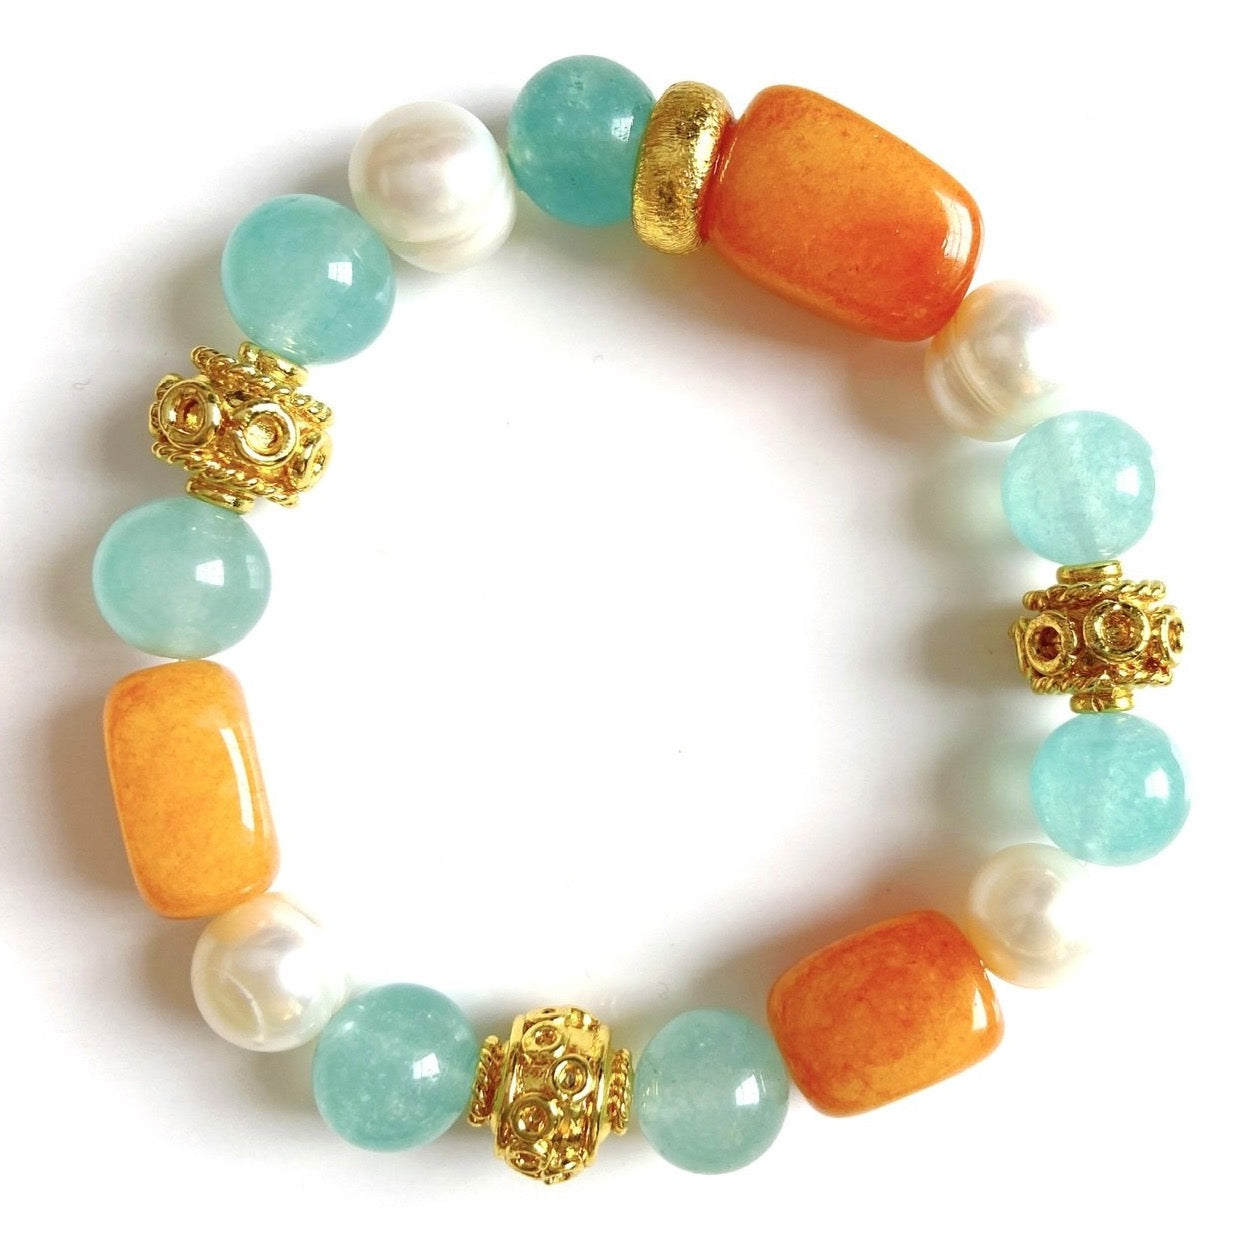 Carnelian, Pearl and Aquamarine Gemstone Bracelet with Gold "Bali" Bead Accents